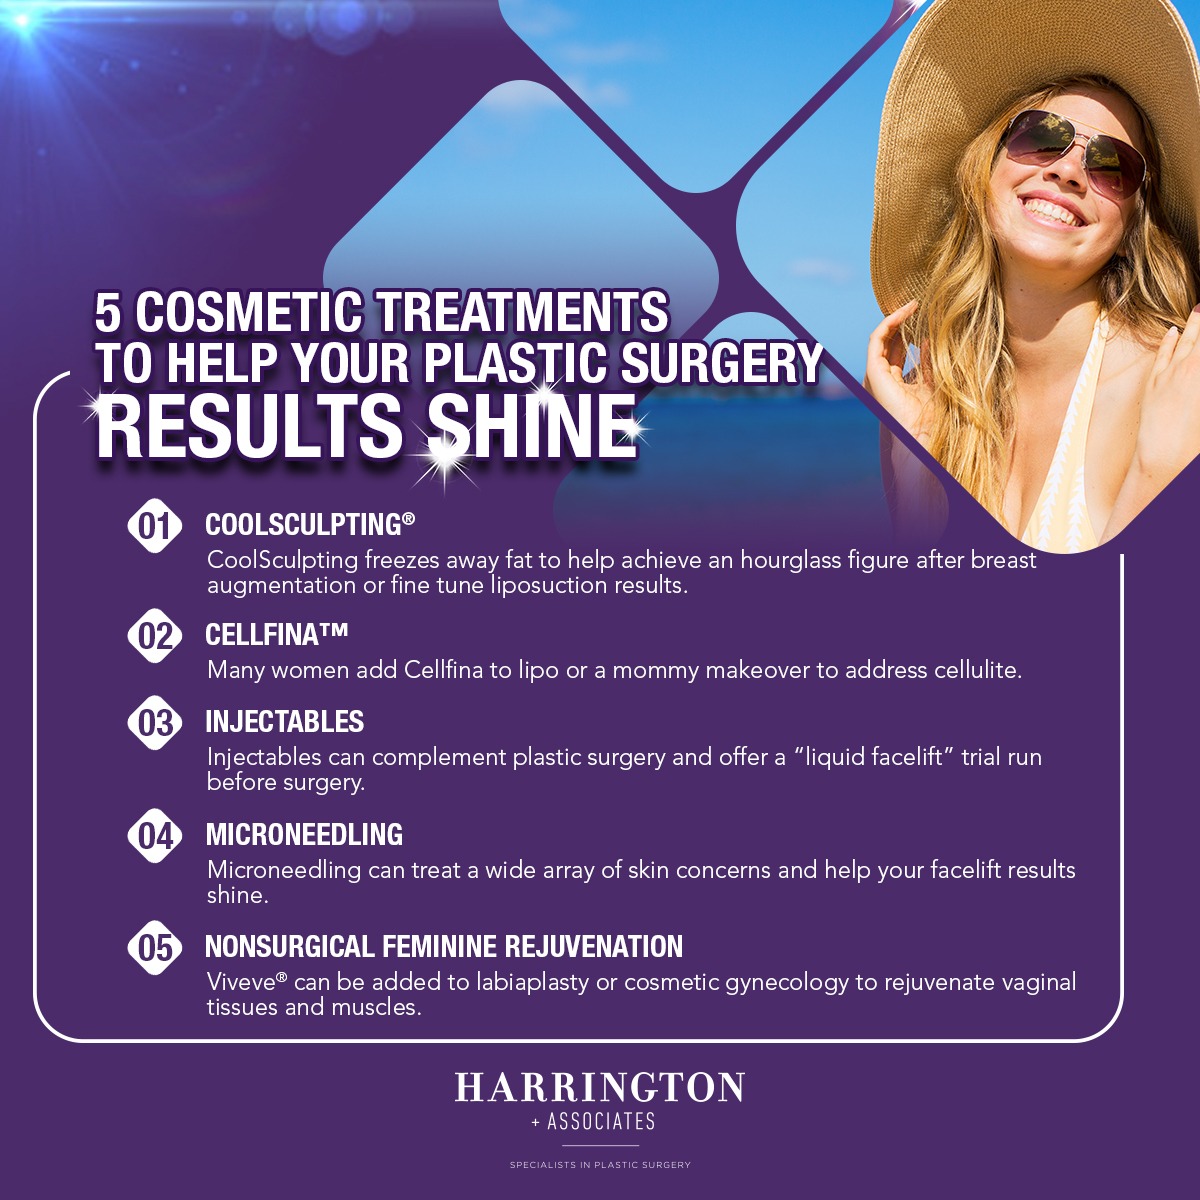 5 Cosmetic Treatments To Help Your Plastic Surgery Results Shine [Infographic] img 1